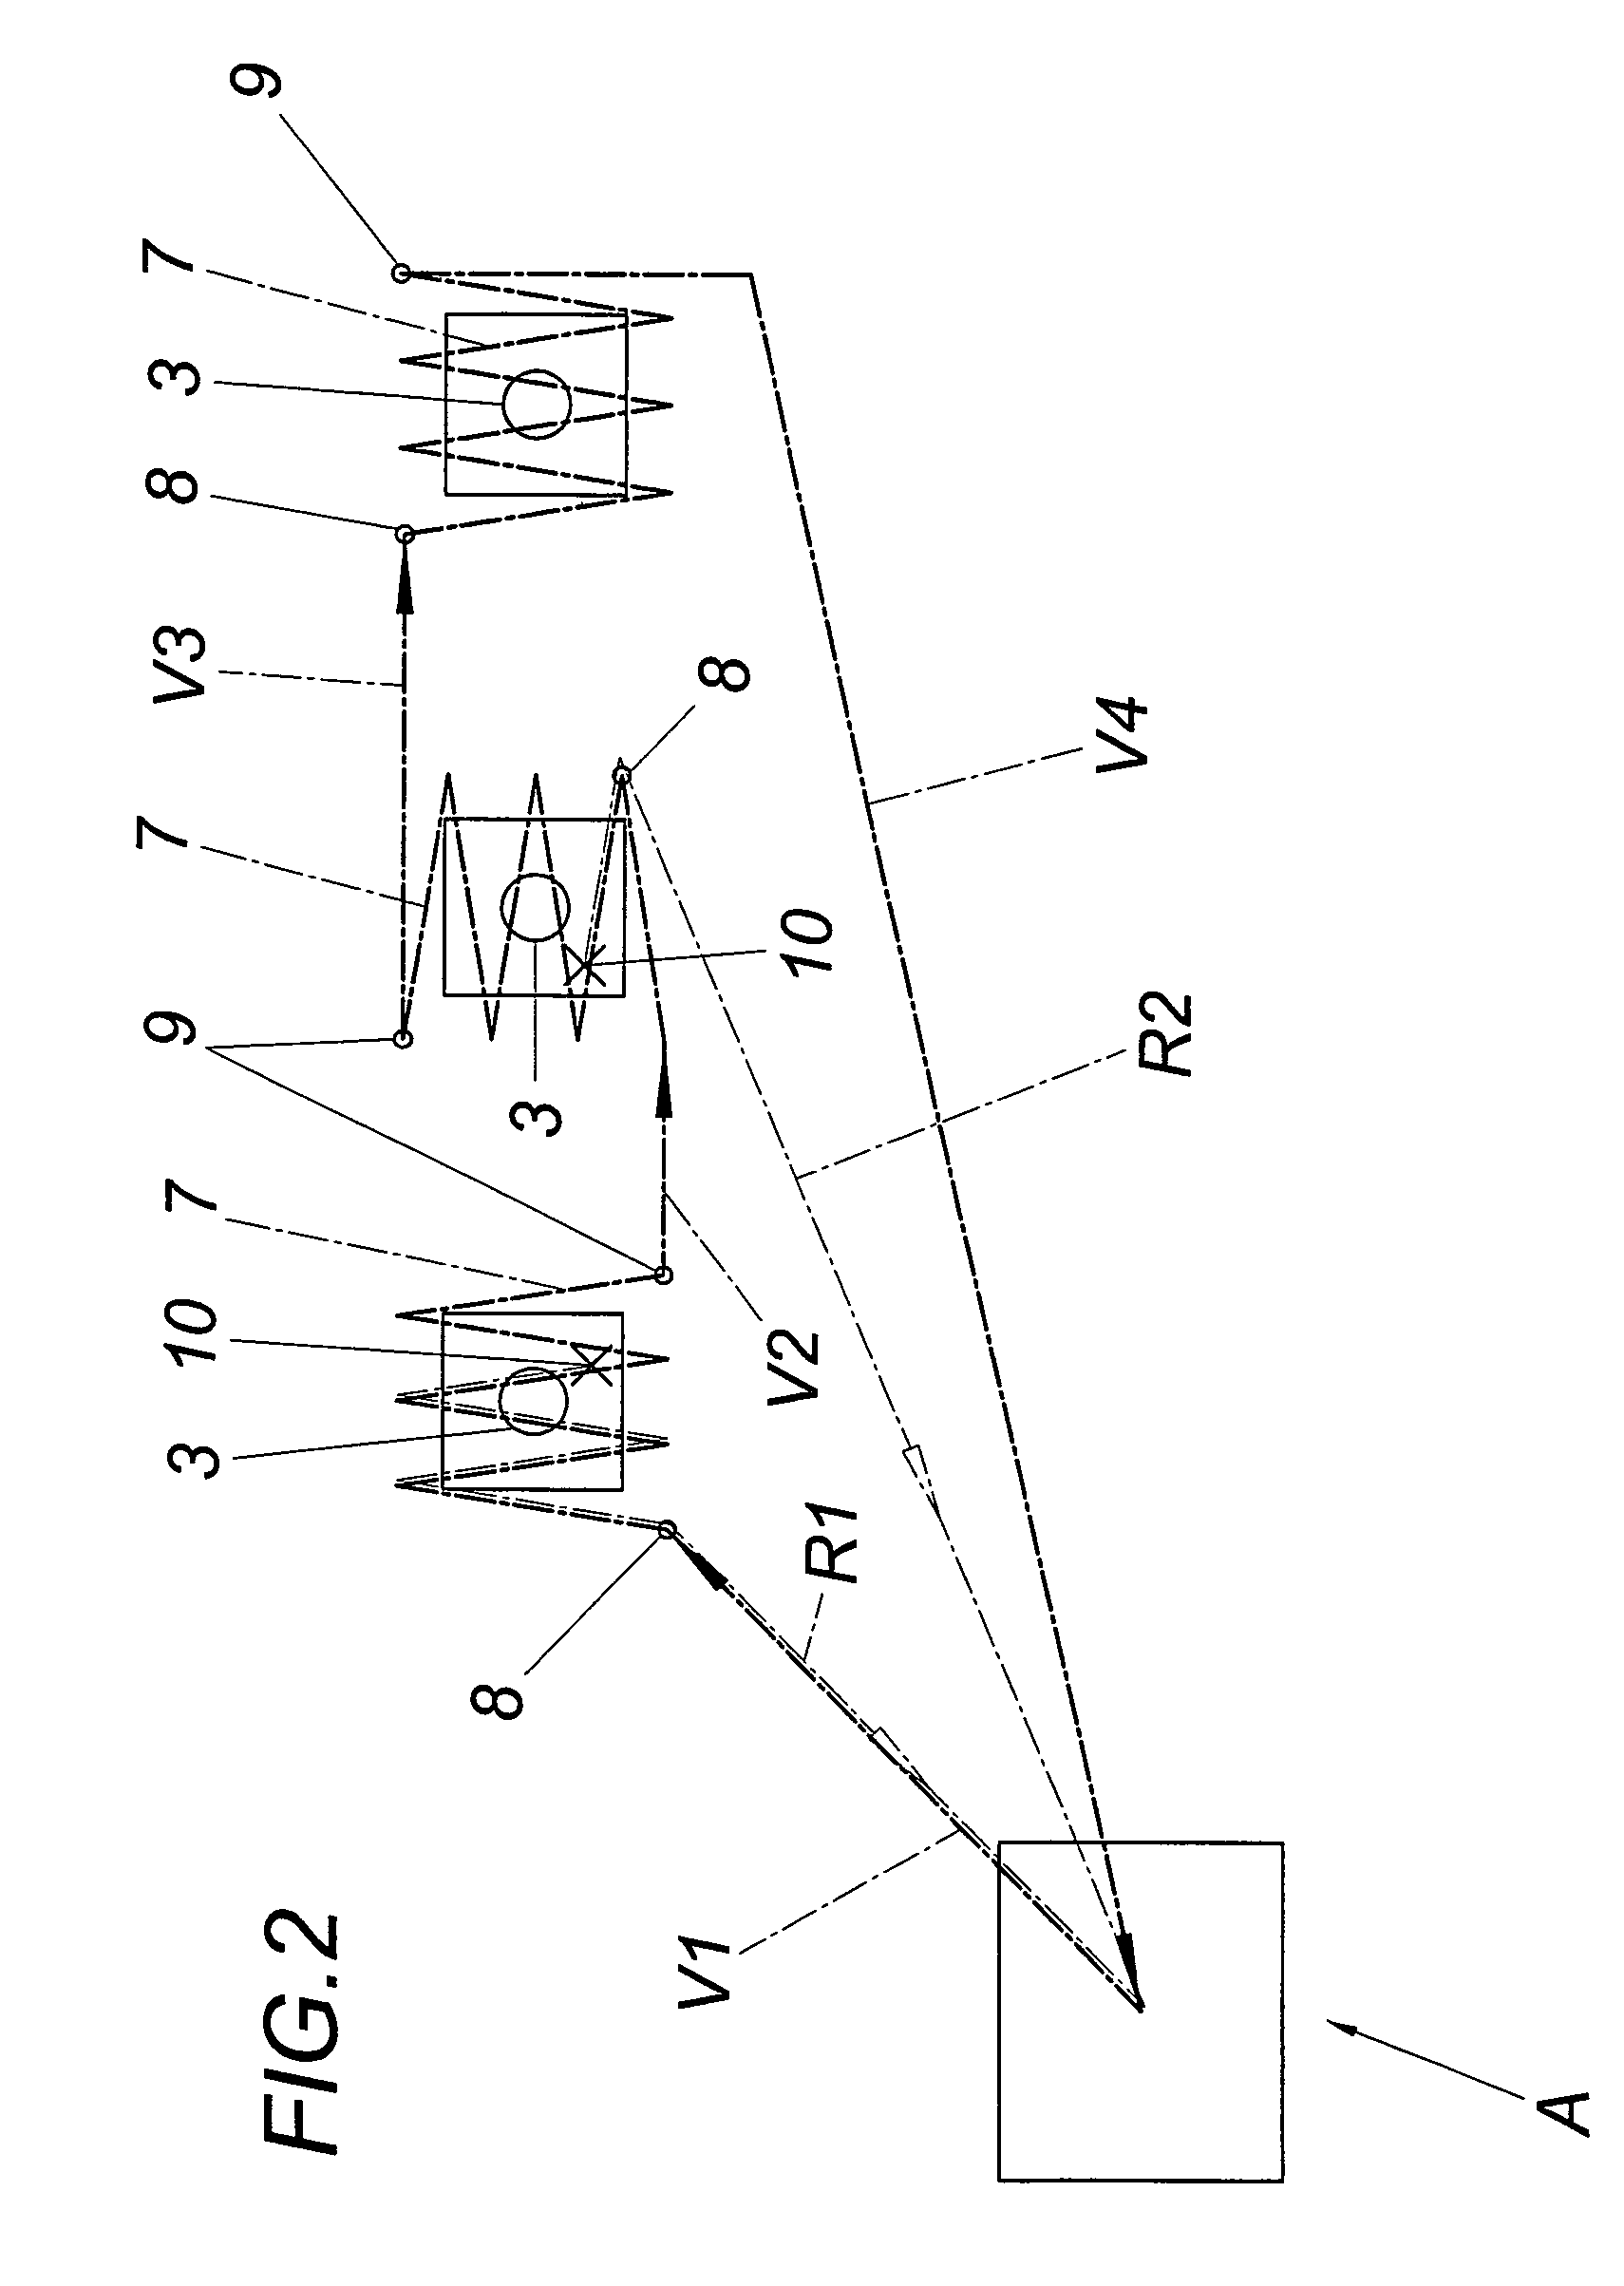 Method for activating a workpiece manipulator of a machine tool